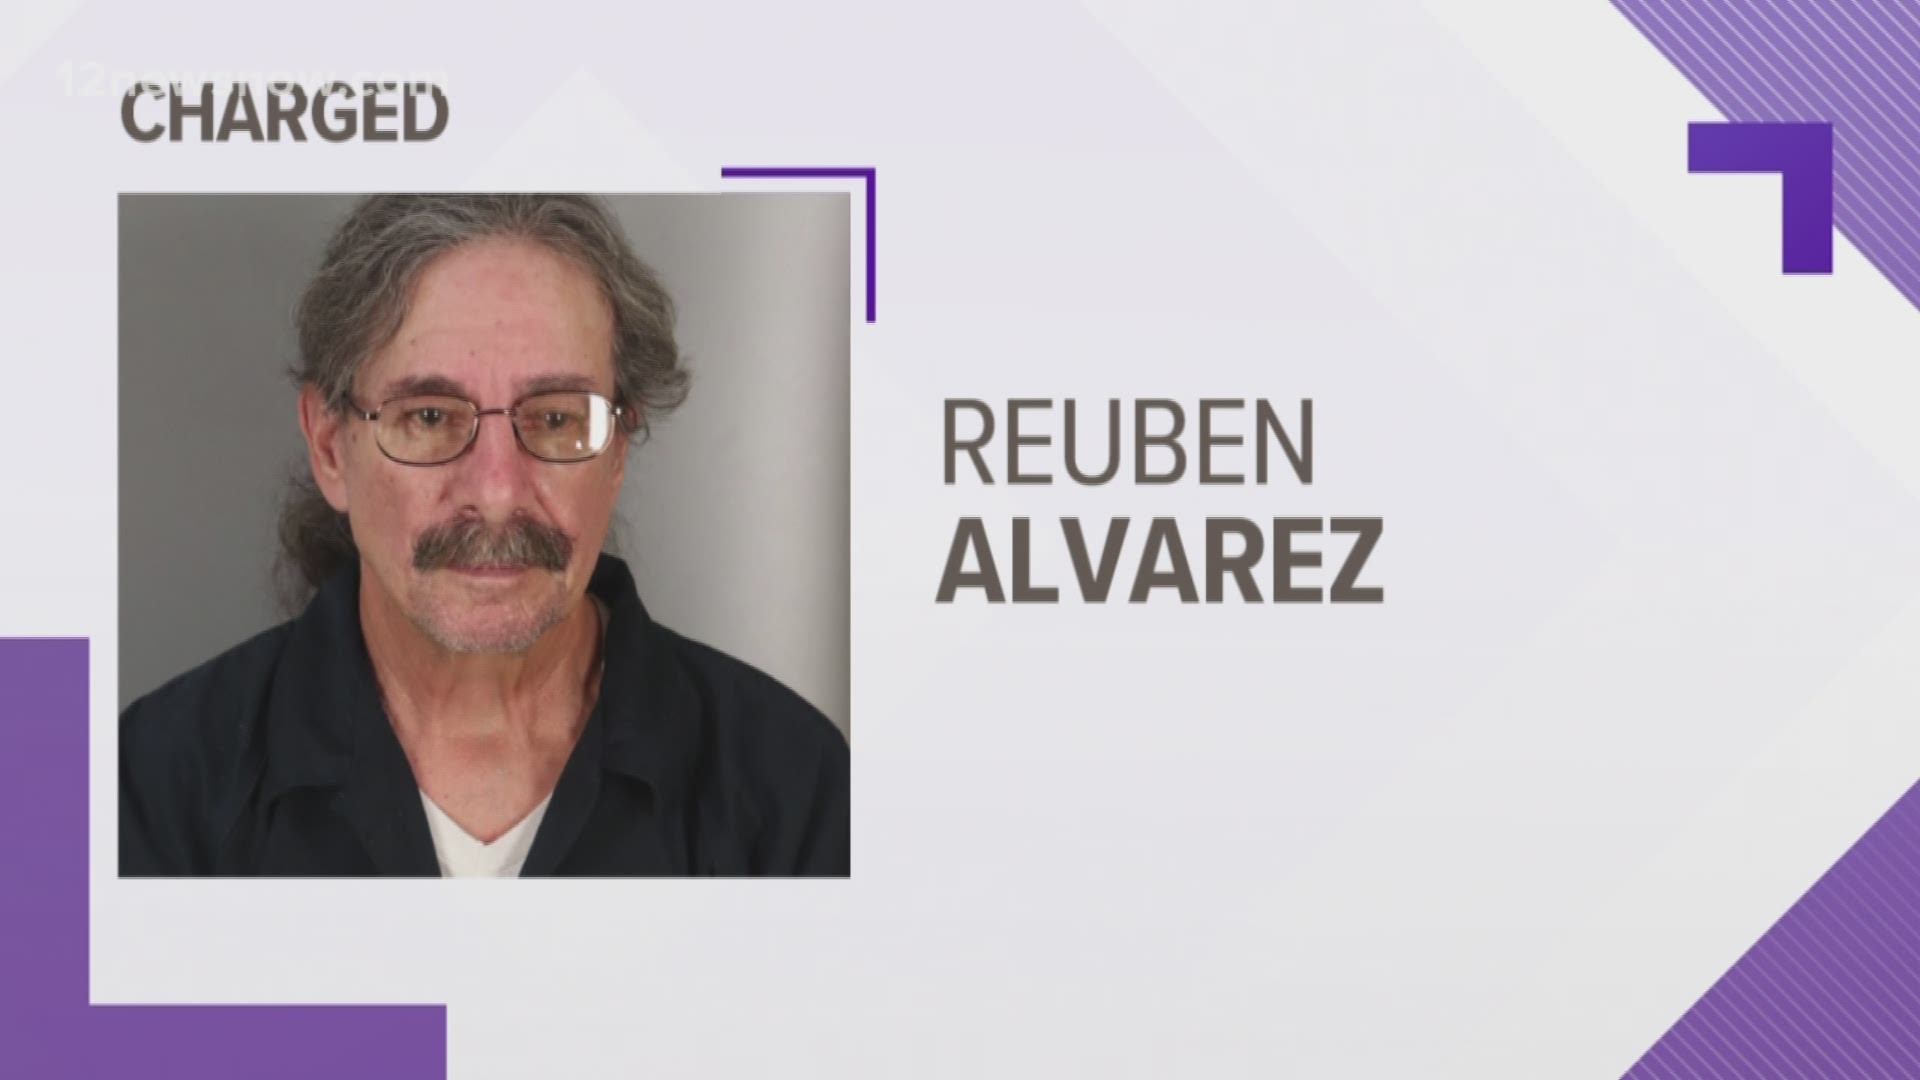 Investigators say Reuben Alvarez was scamming businesses and the church in several states using what is known as a “business e-mail compromise”